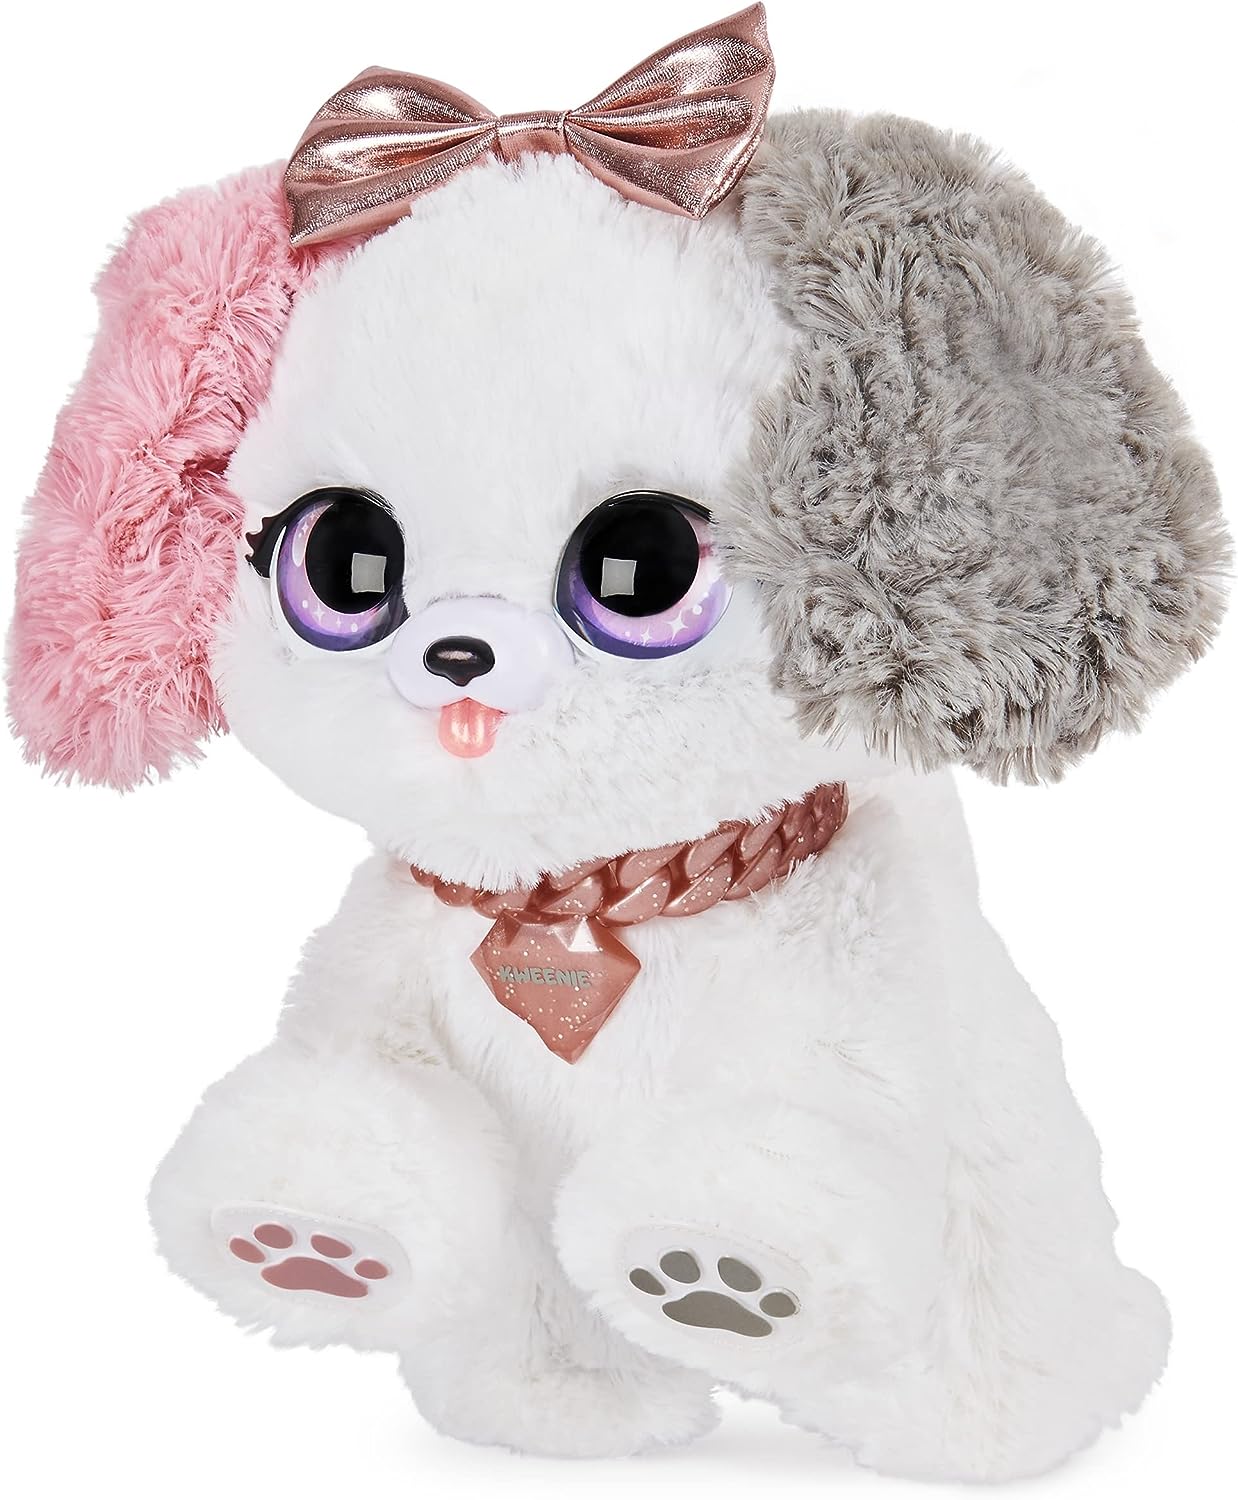 Read more about the article Present Pets Interactive Plush Toy Review